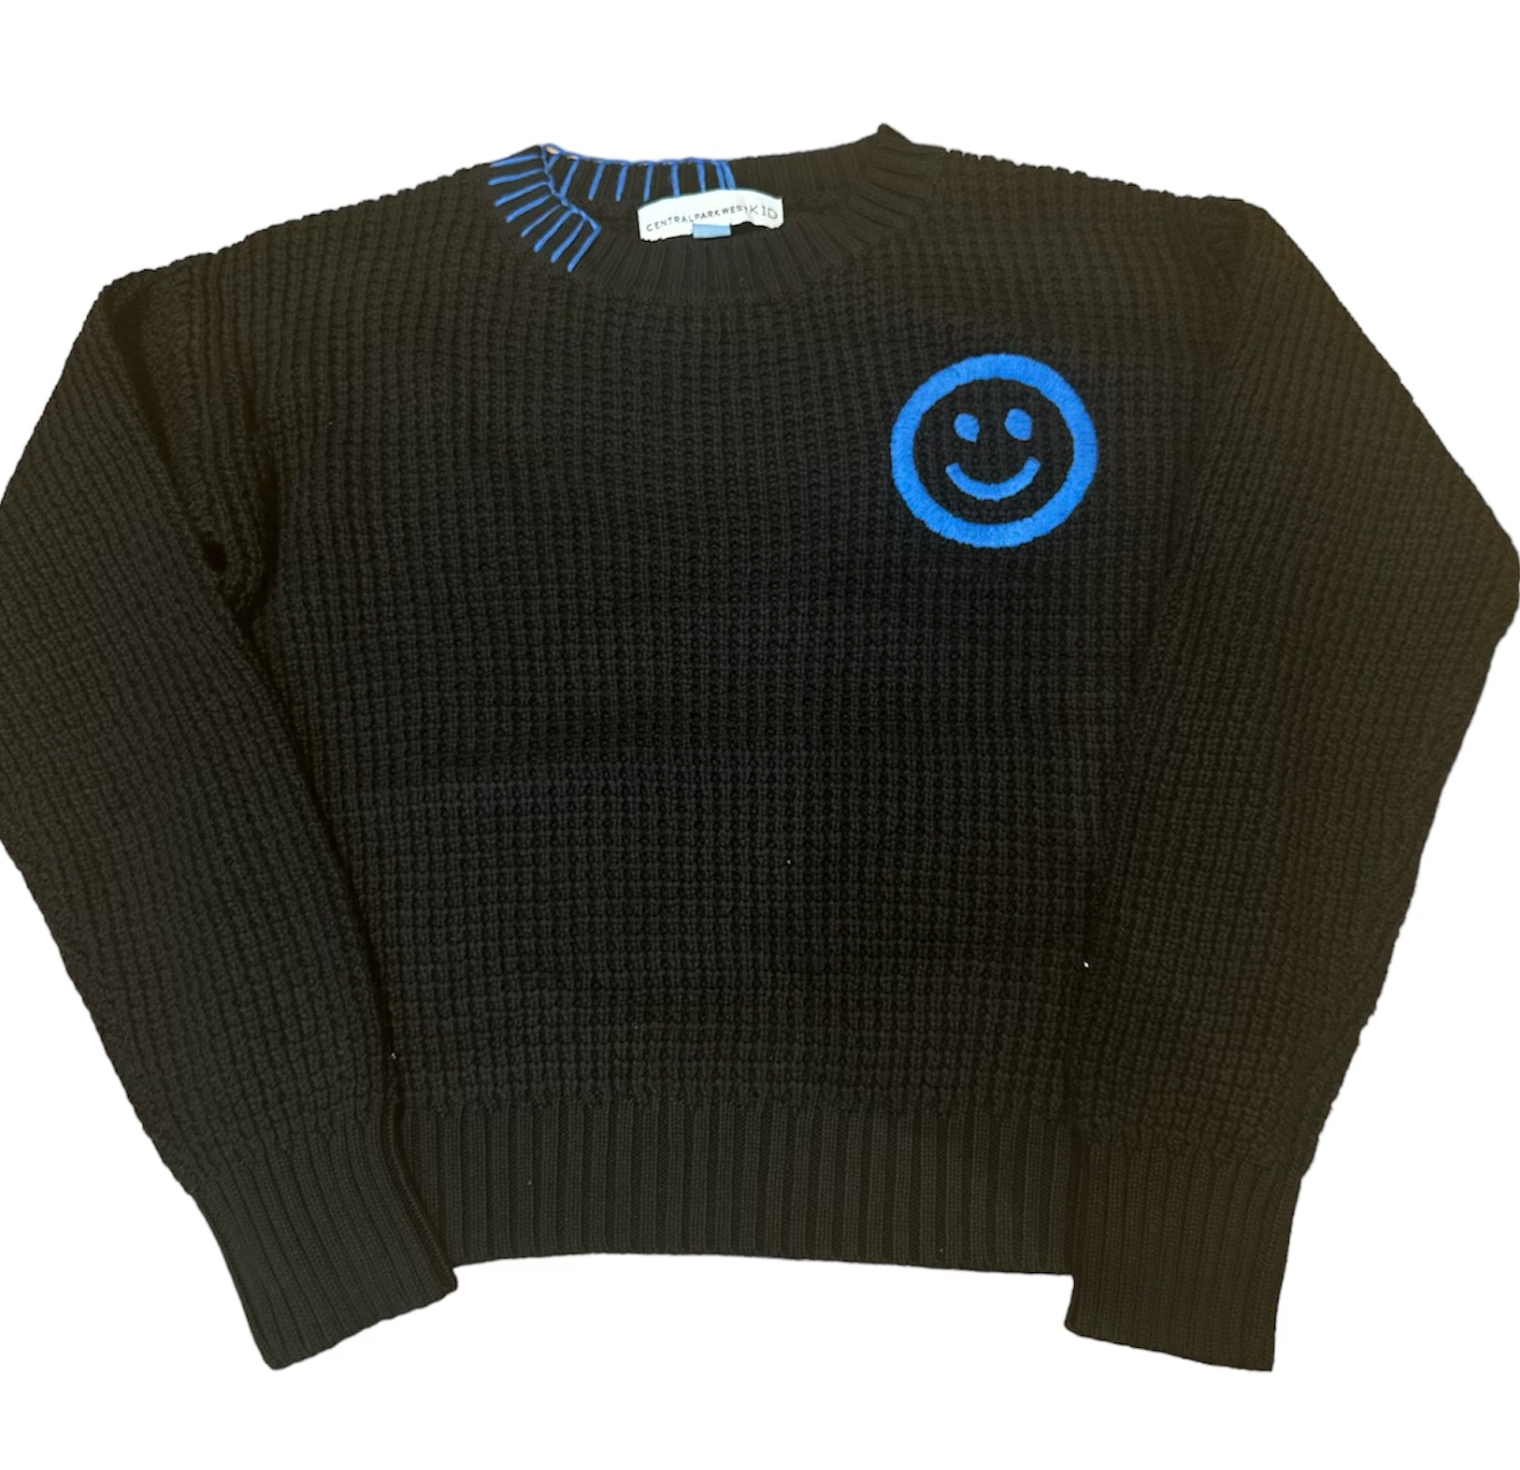 Central Park West - Smiley Sweater